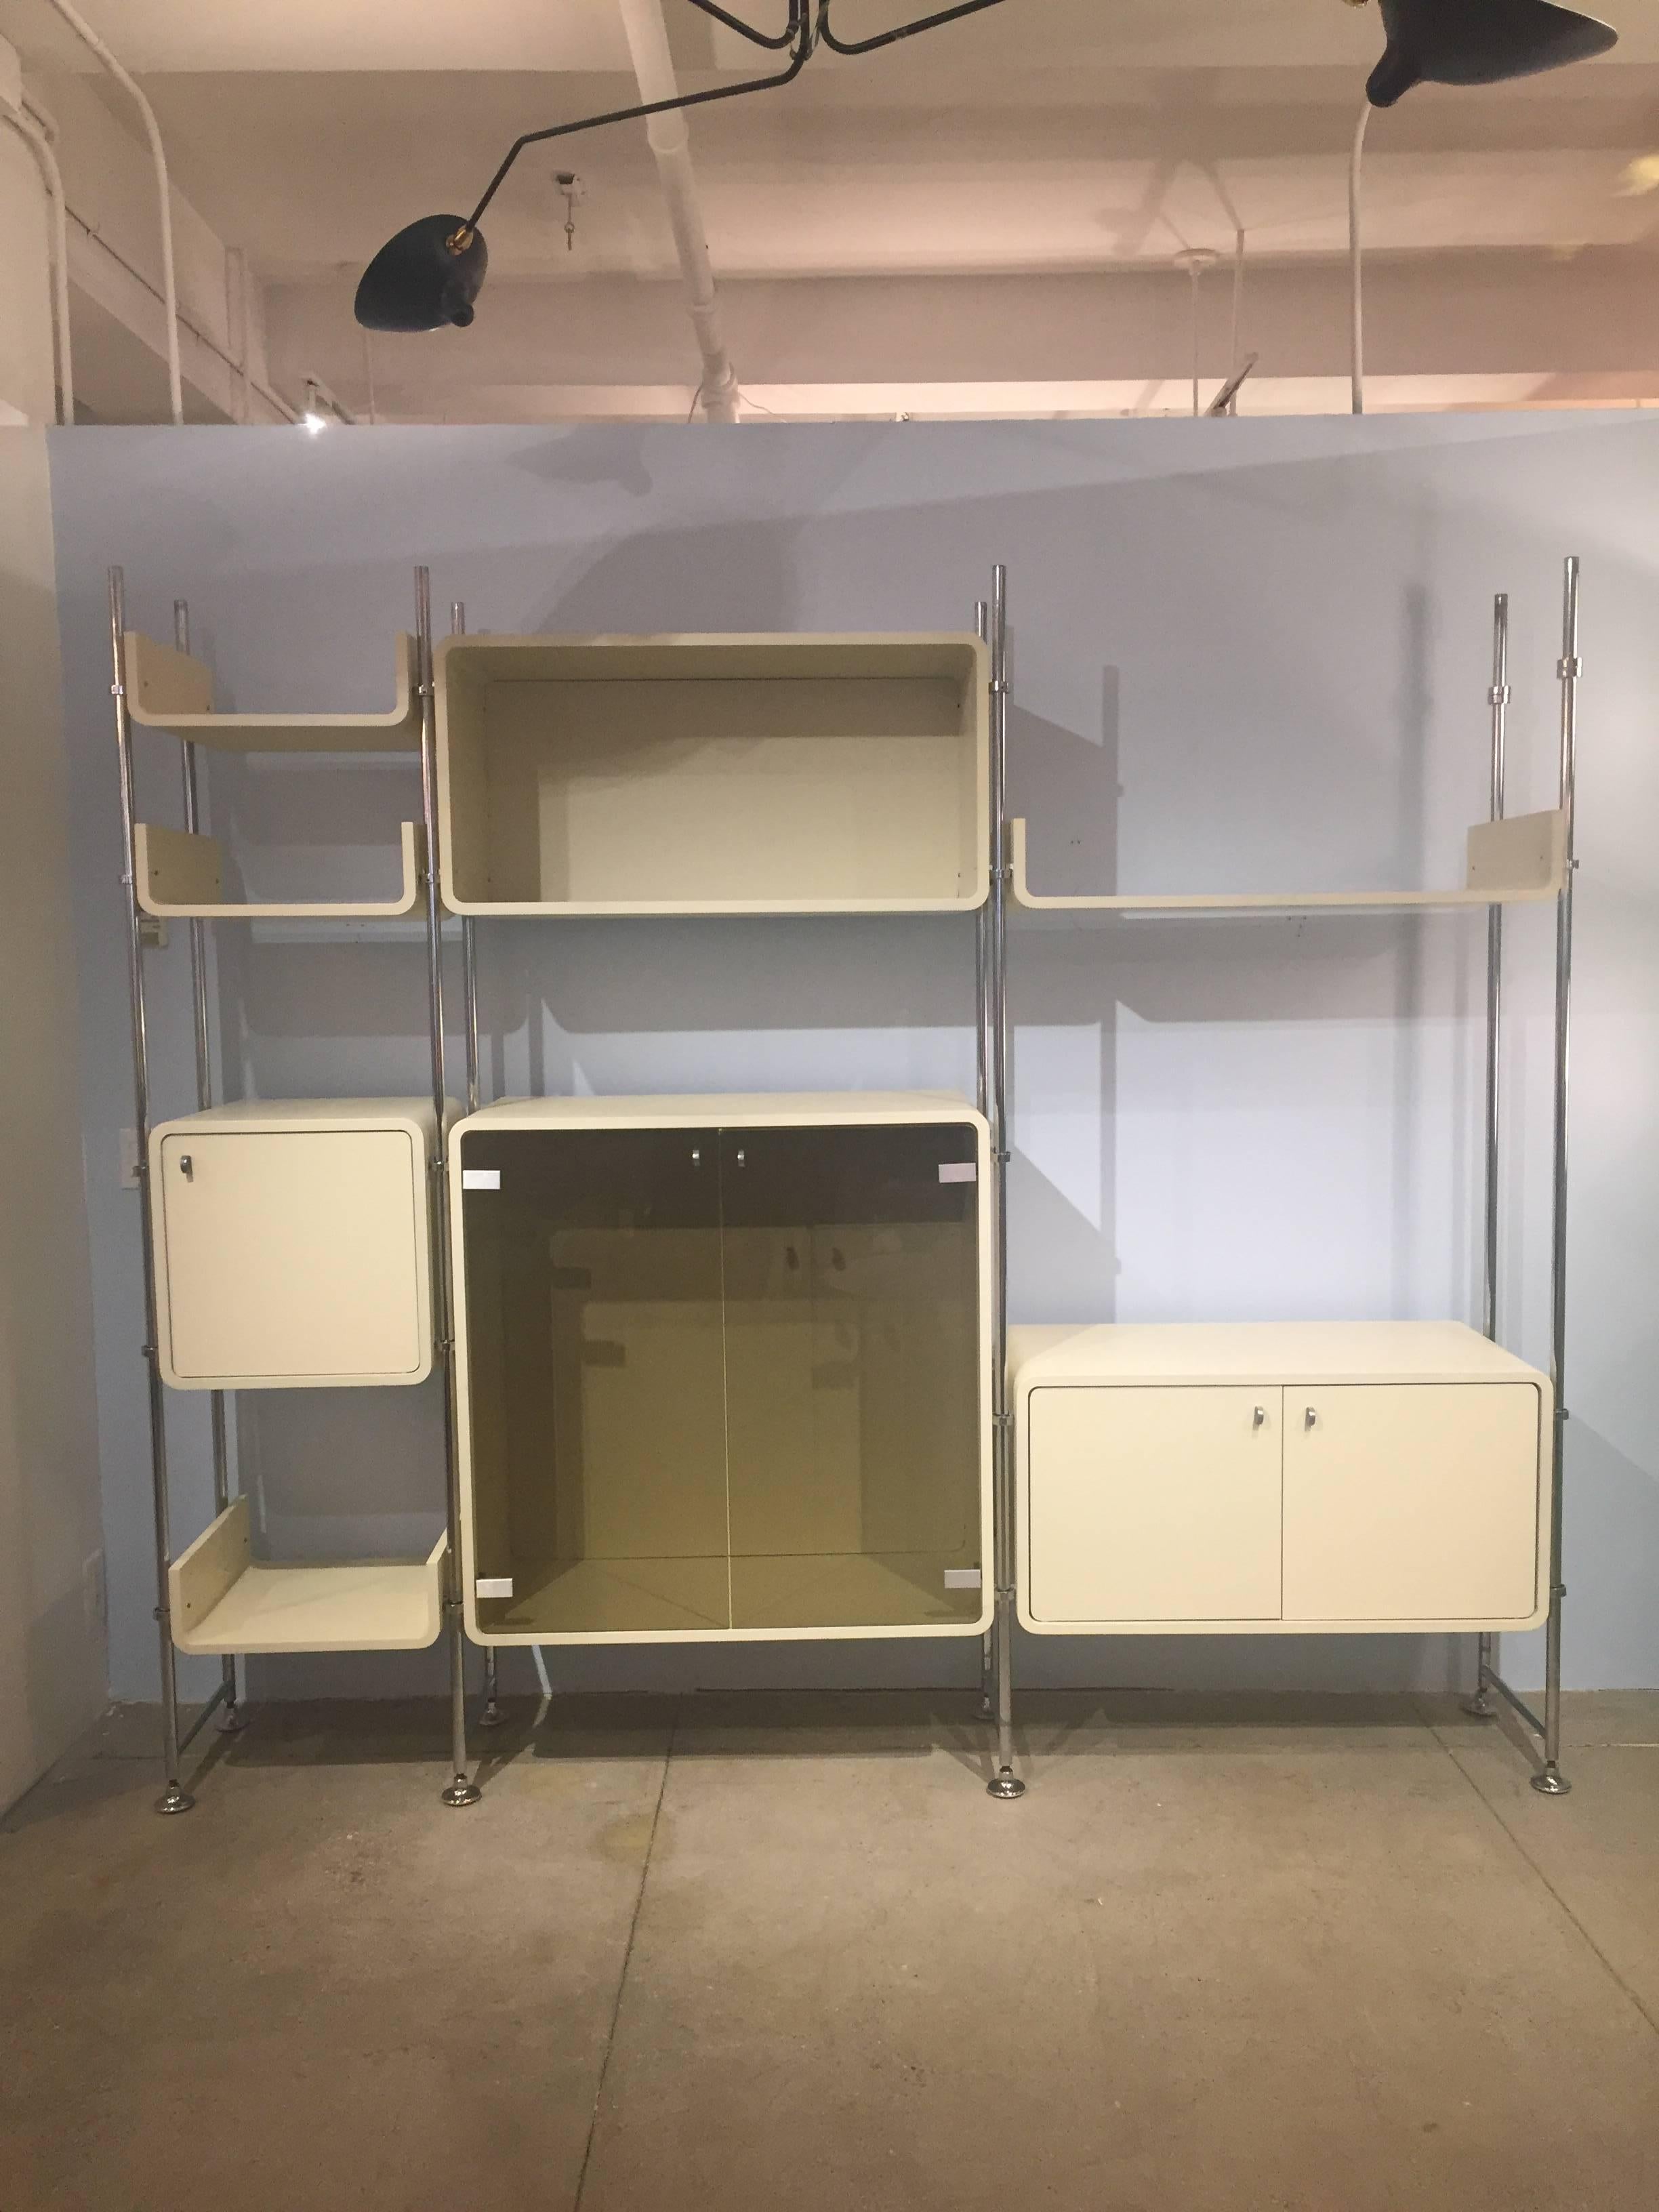 This stylish shelving unit utilizes a simple yet clever adjustable system for hanging the various shelves and cabinets that is highly adjustable, visually appealing, and also very stabile.